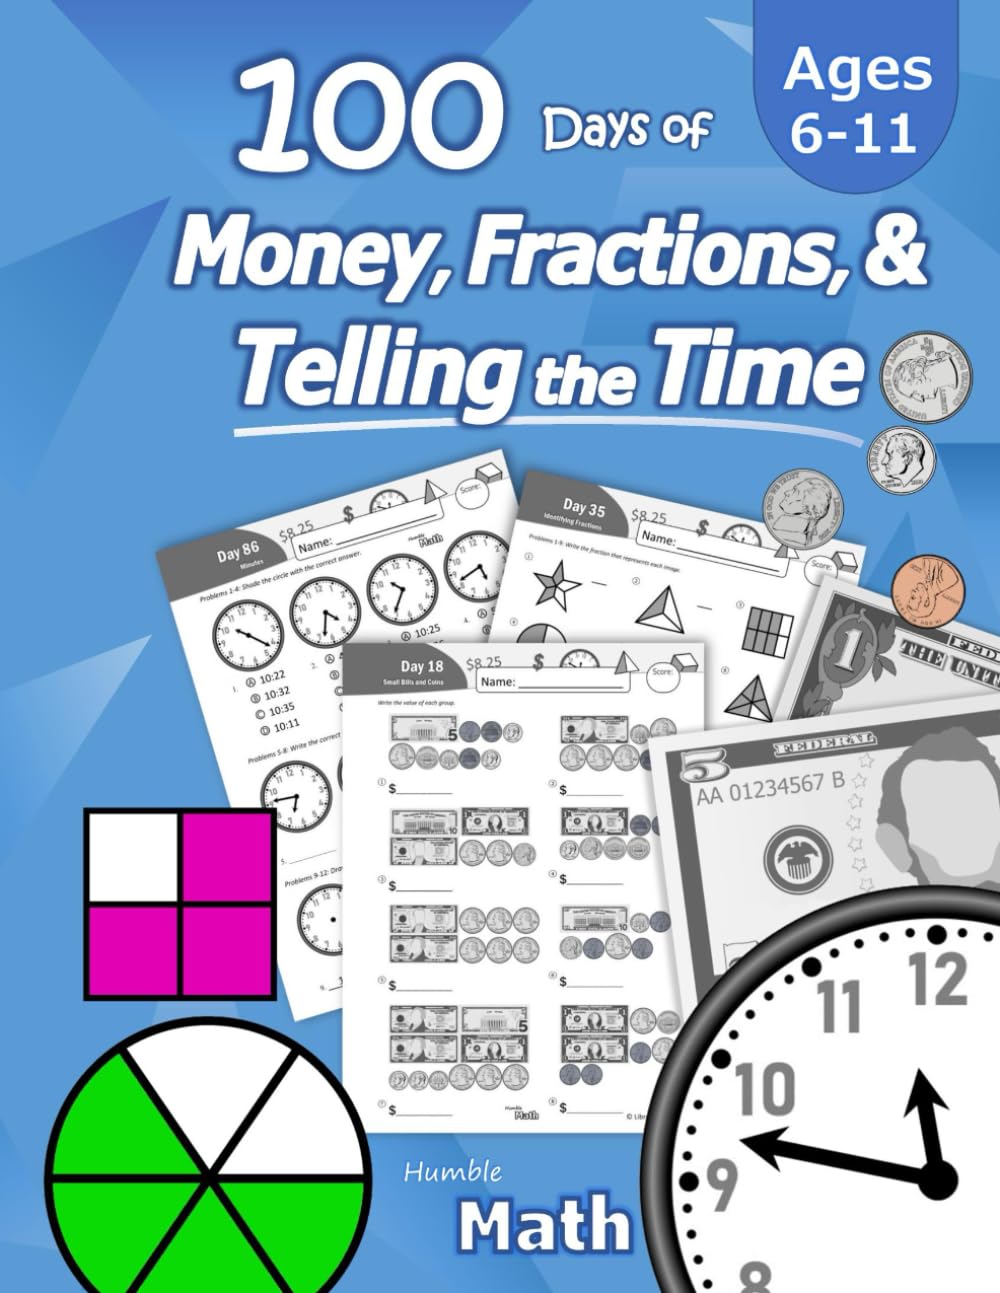 Humble Math - 100 Days of Money, Fractions, & Telling the Time: Workbook (With Answer Key): Ages 6-11 - Count Money (Counting United States Coins and by Math, Humble